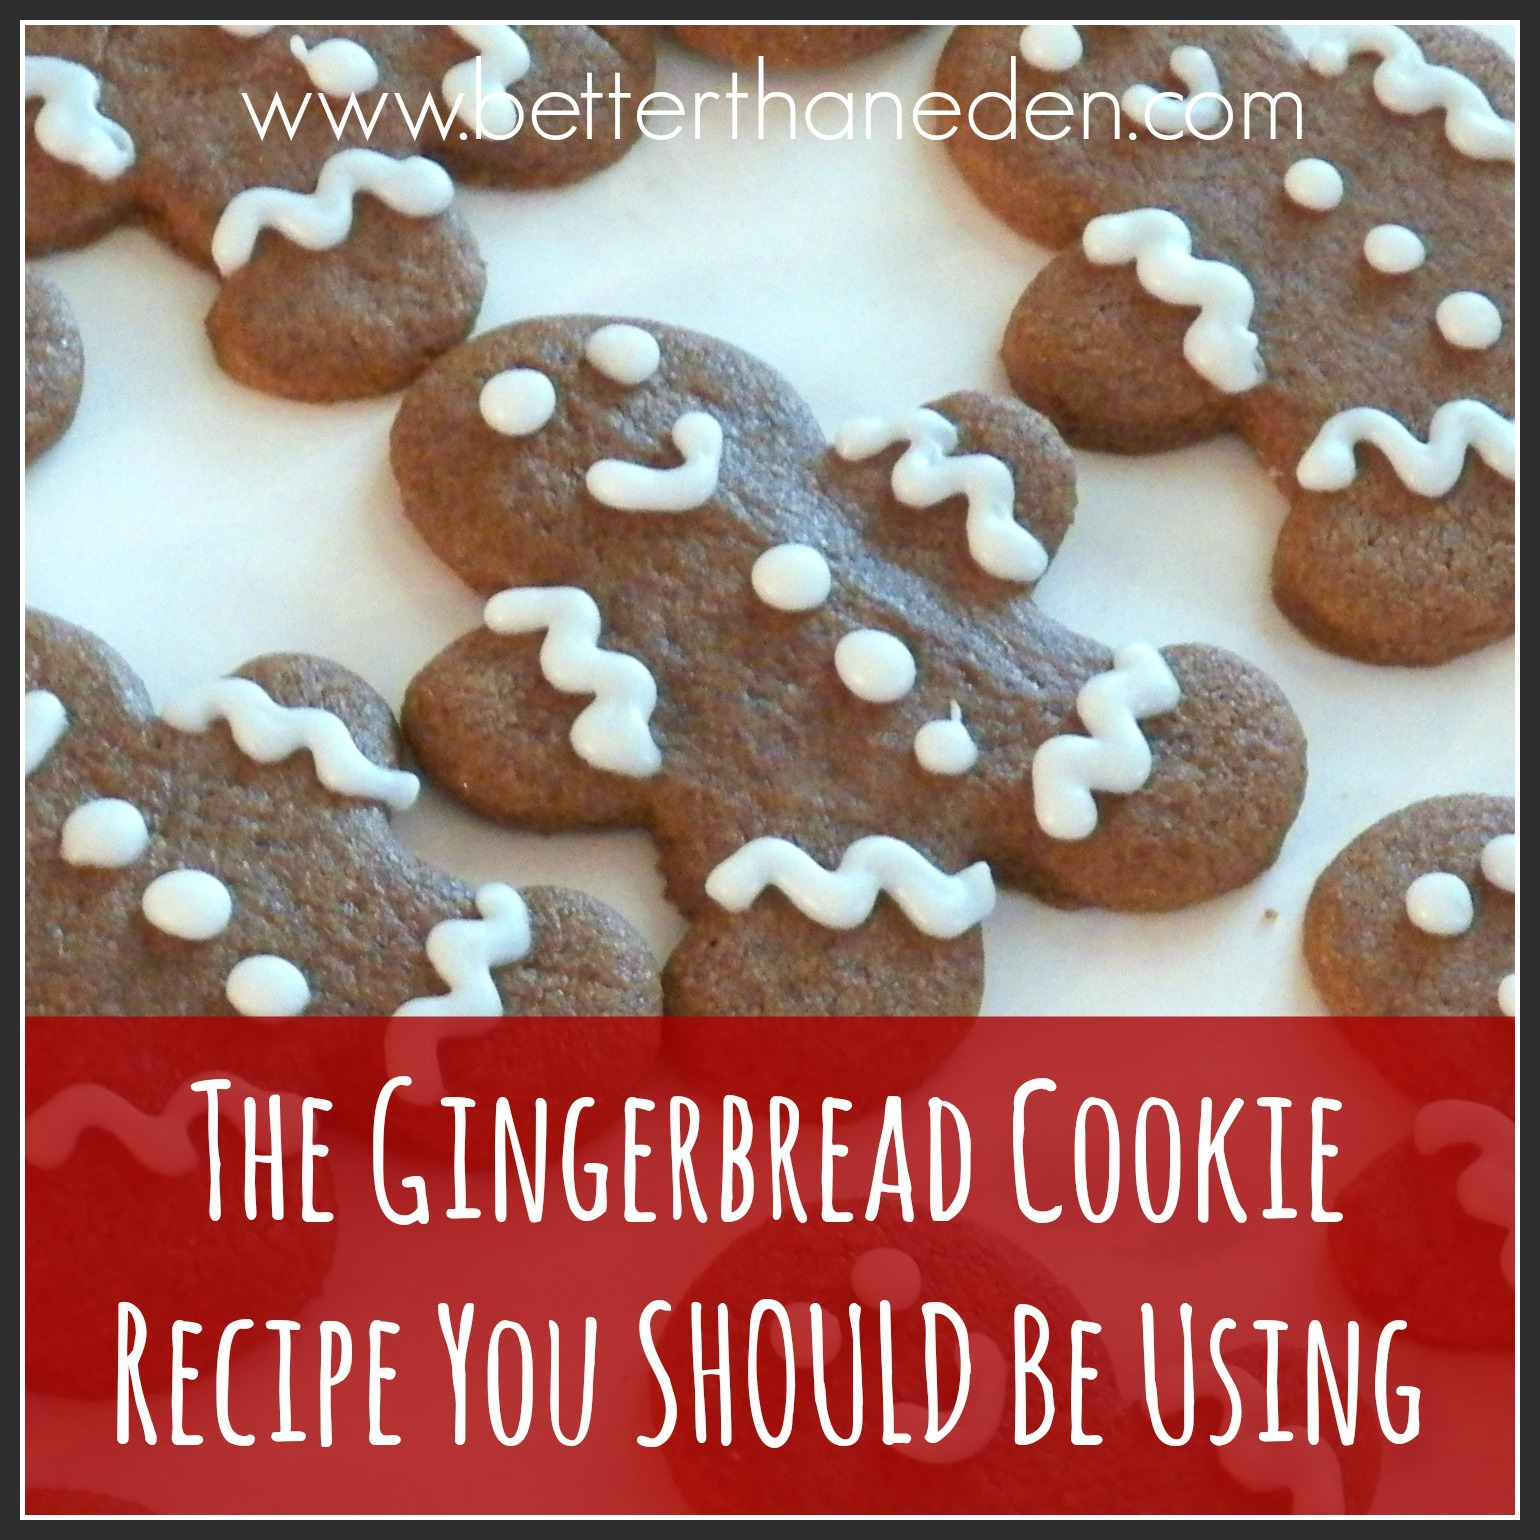 The Gingerbread Cookie Recipe You Should Be Using - Mary Haseltine